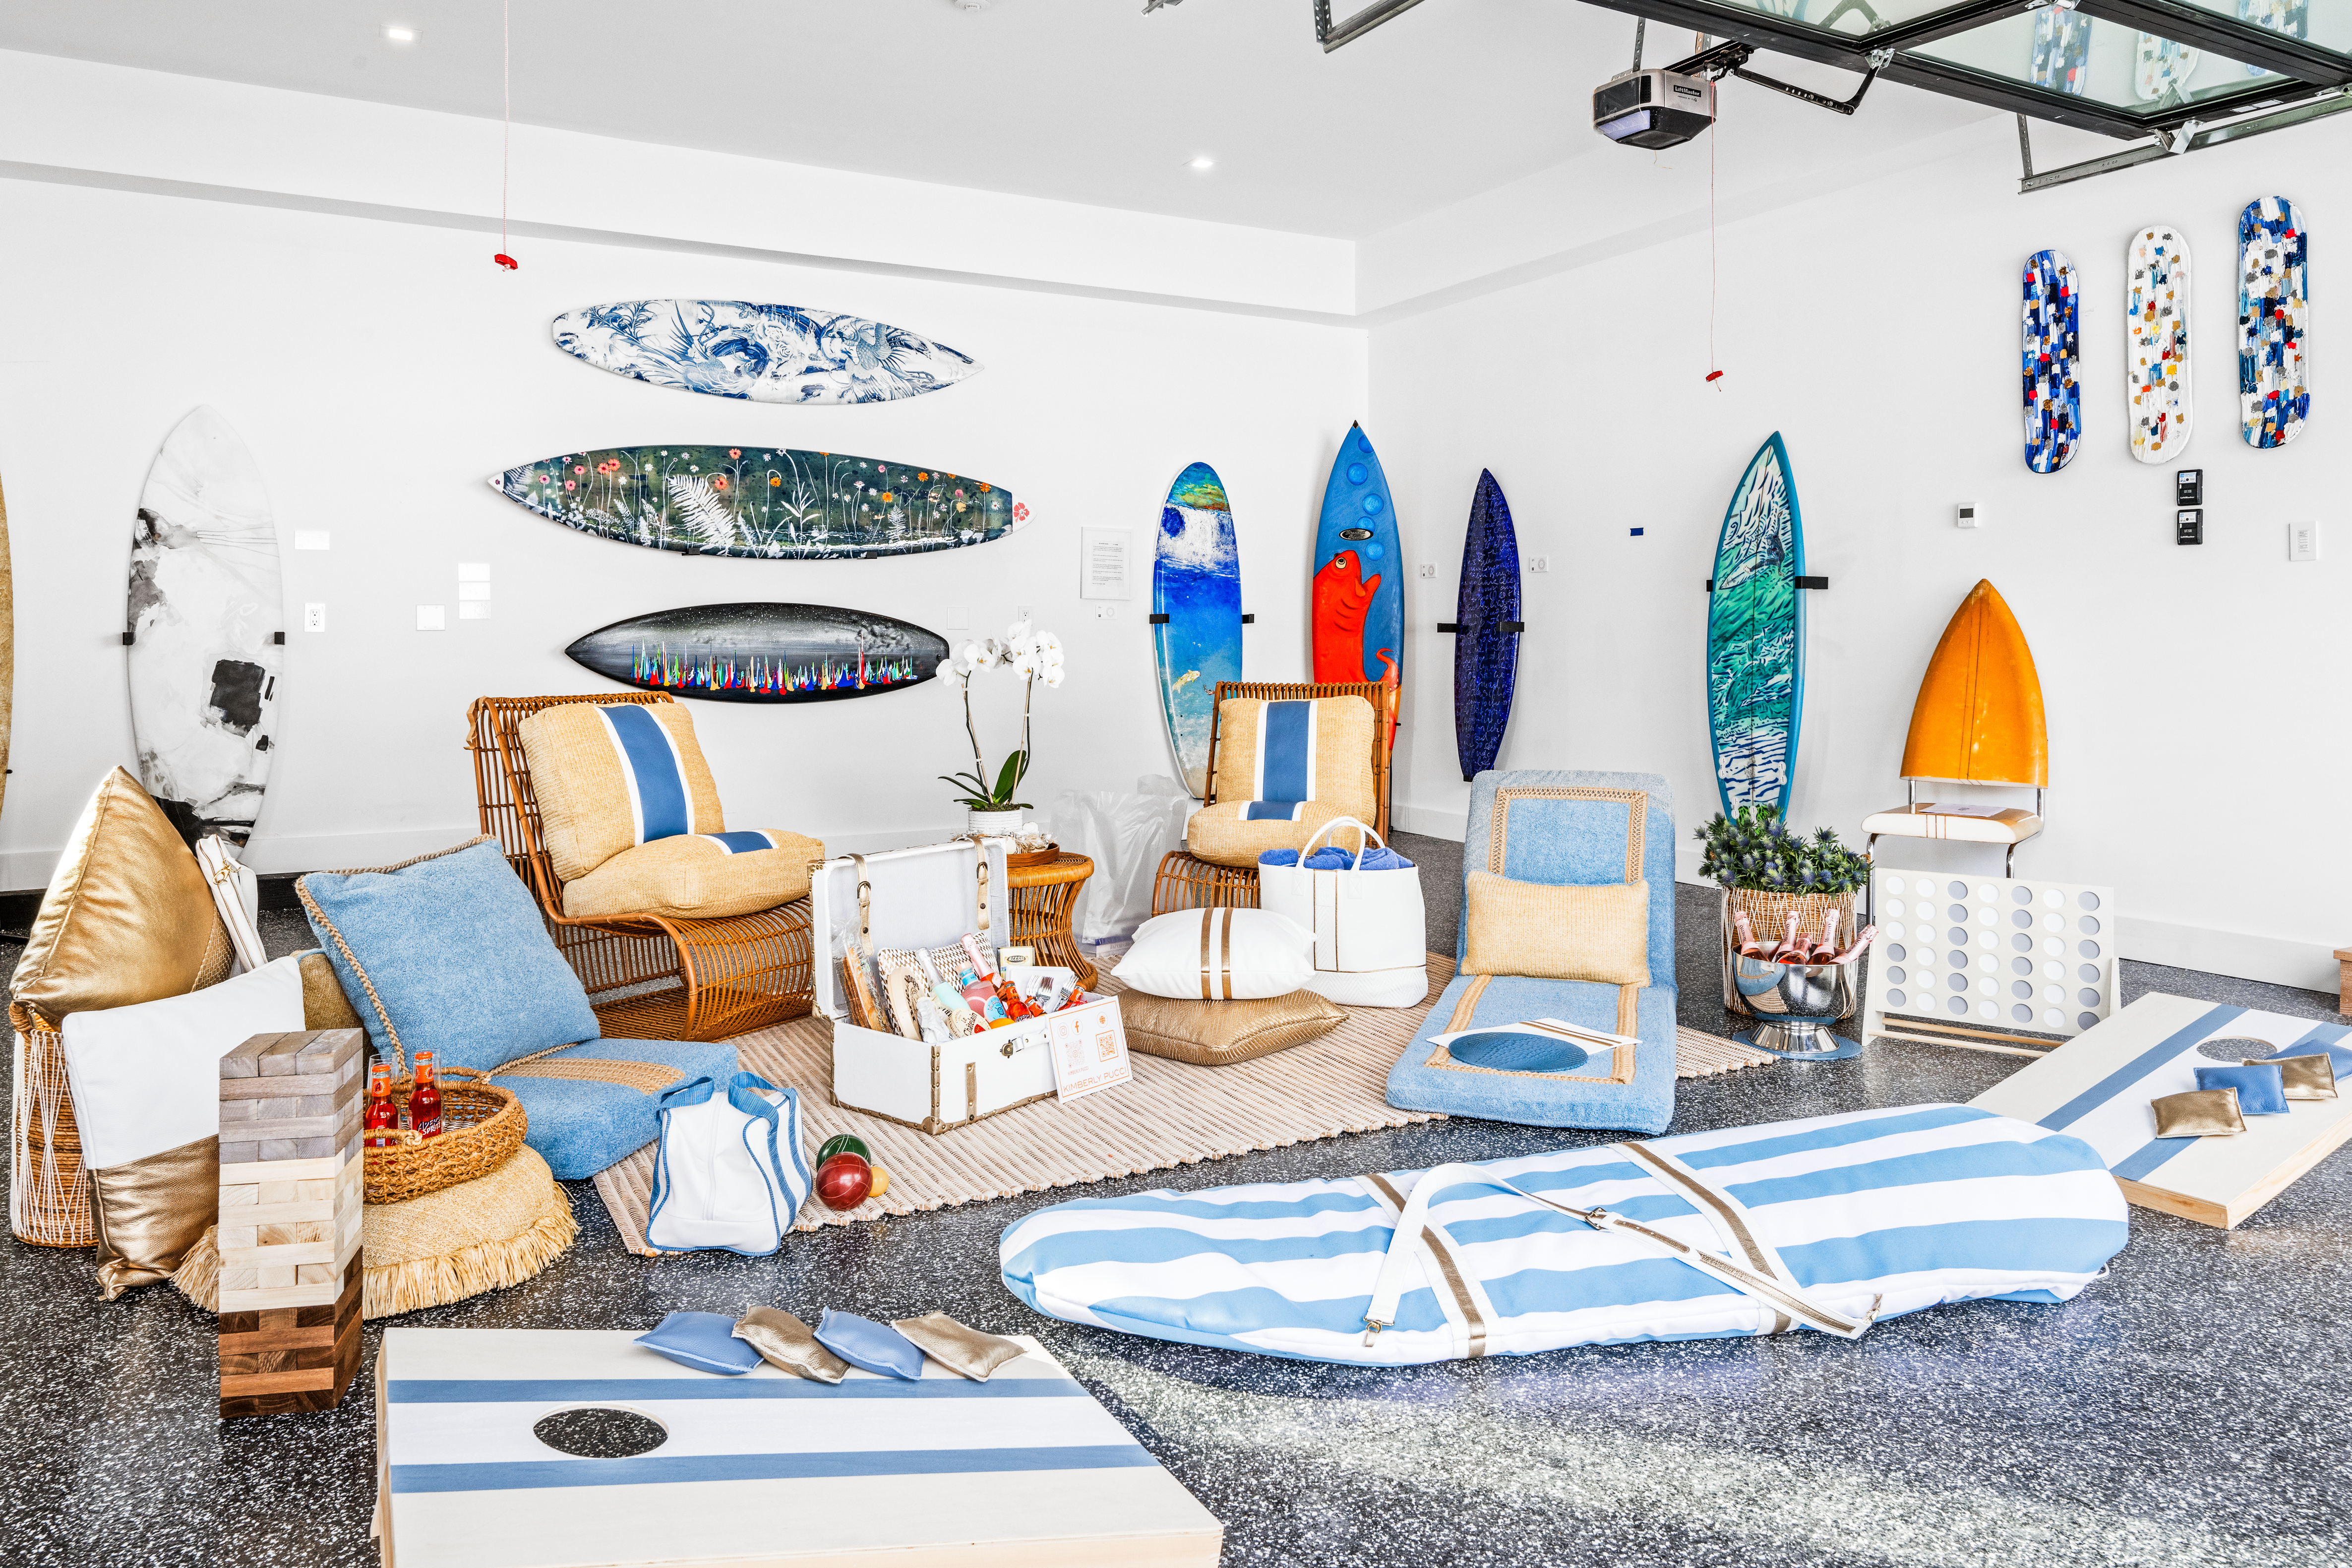 Art surfboards on display at the Hamptons Holiday House